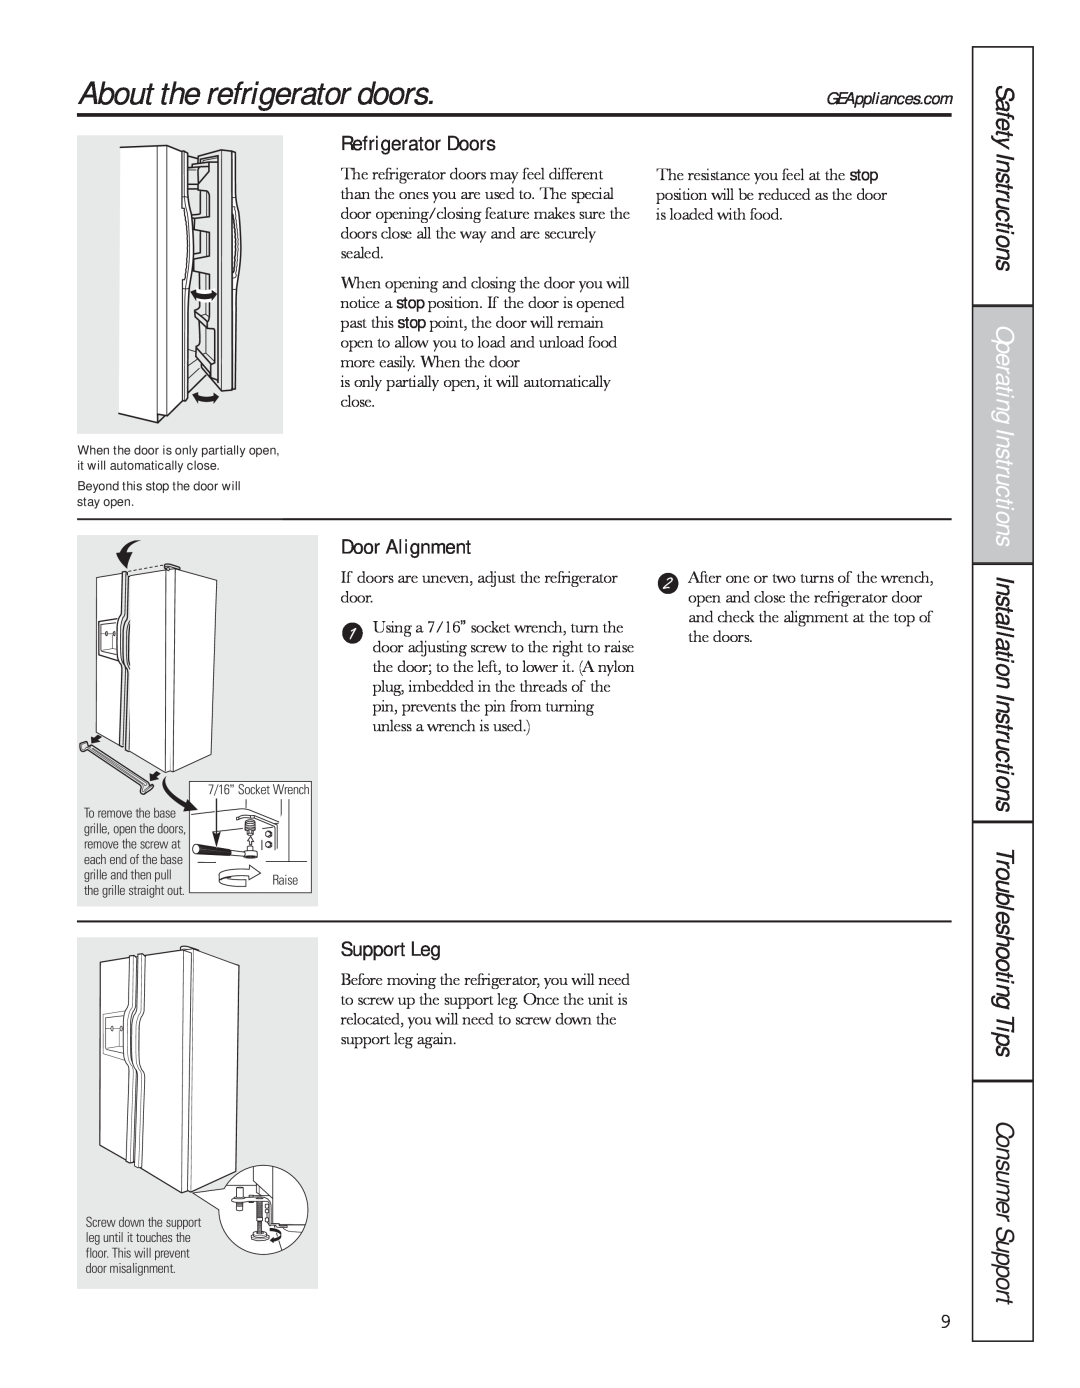 GE 200D8074P044 About the refrigerator doors, Instructions Operating, Tips Consumer Support, Refrigerator Doors 